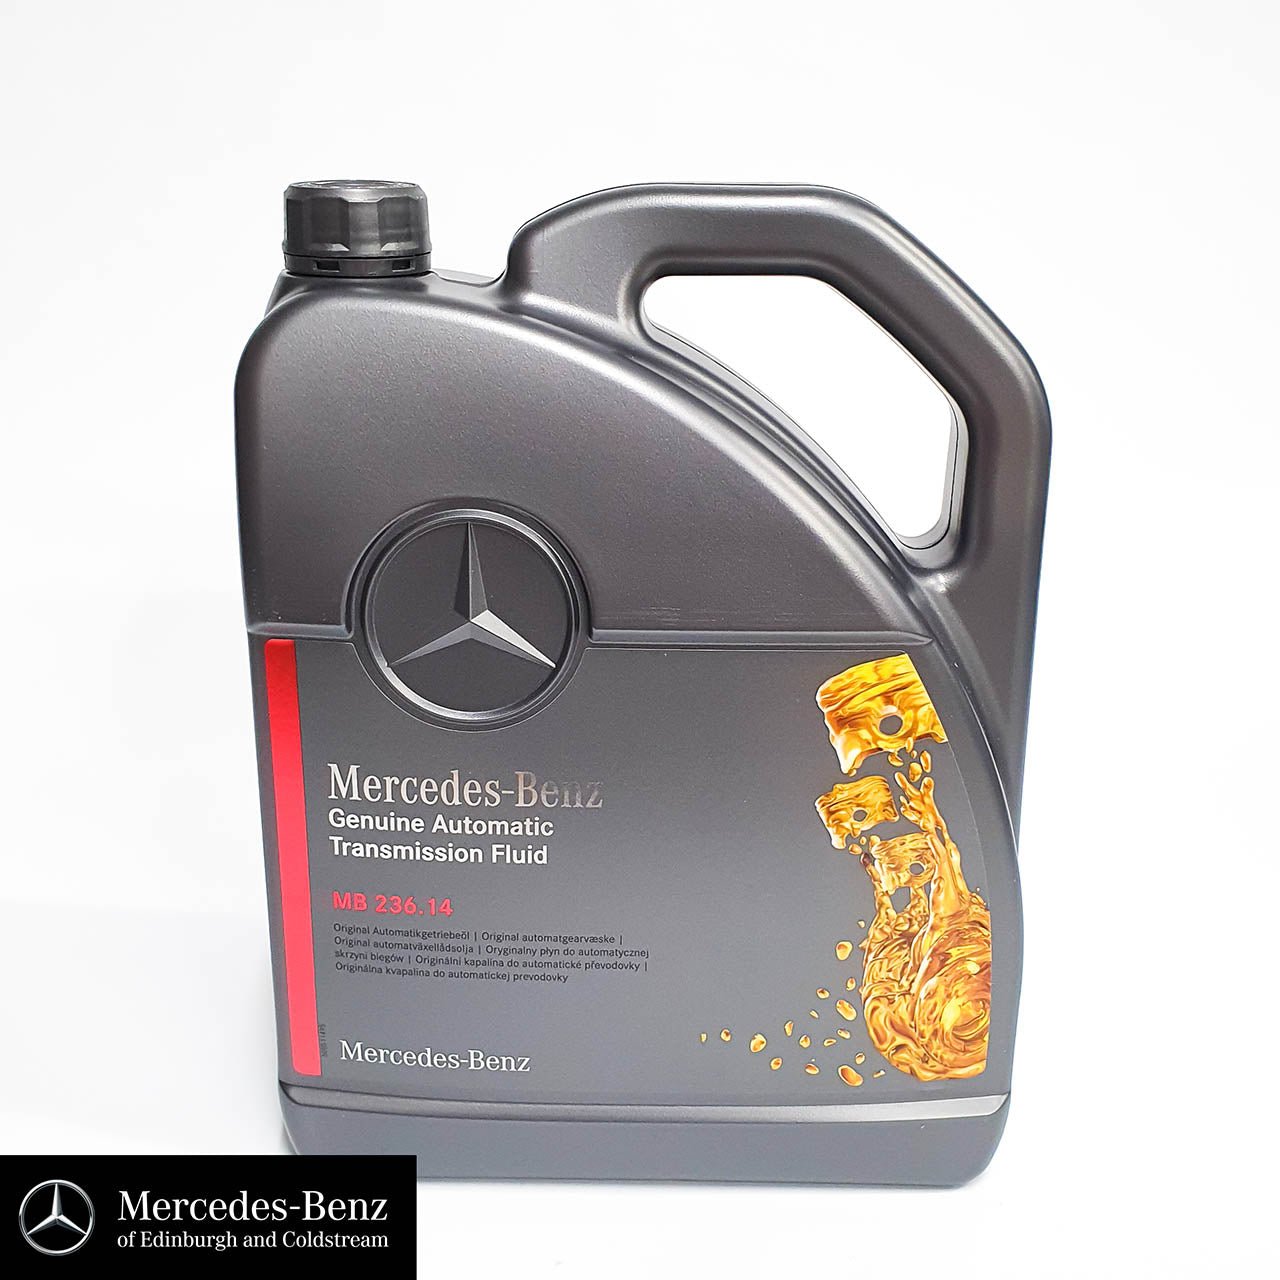 Genuine Mercedes-Benz 724.2 Automatic gearbox oil (RED) kit for conventional and hybrid cars